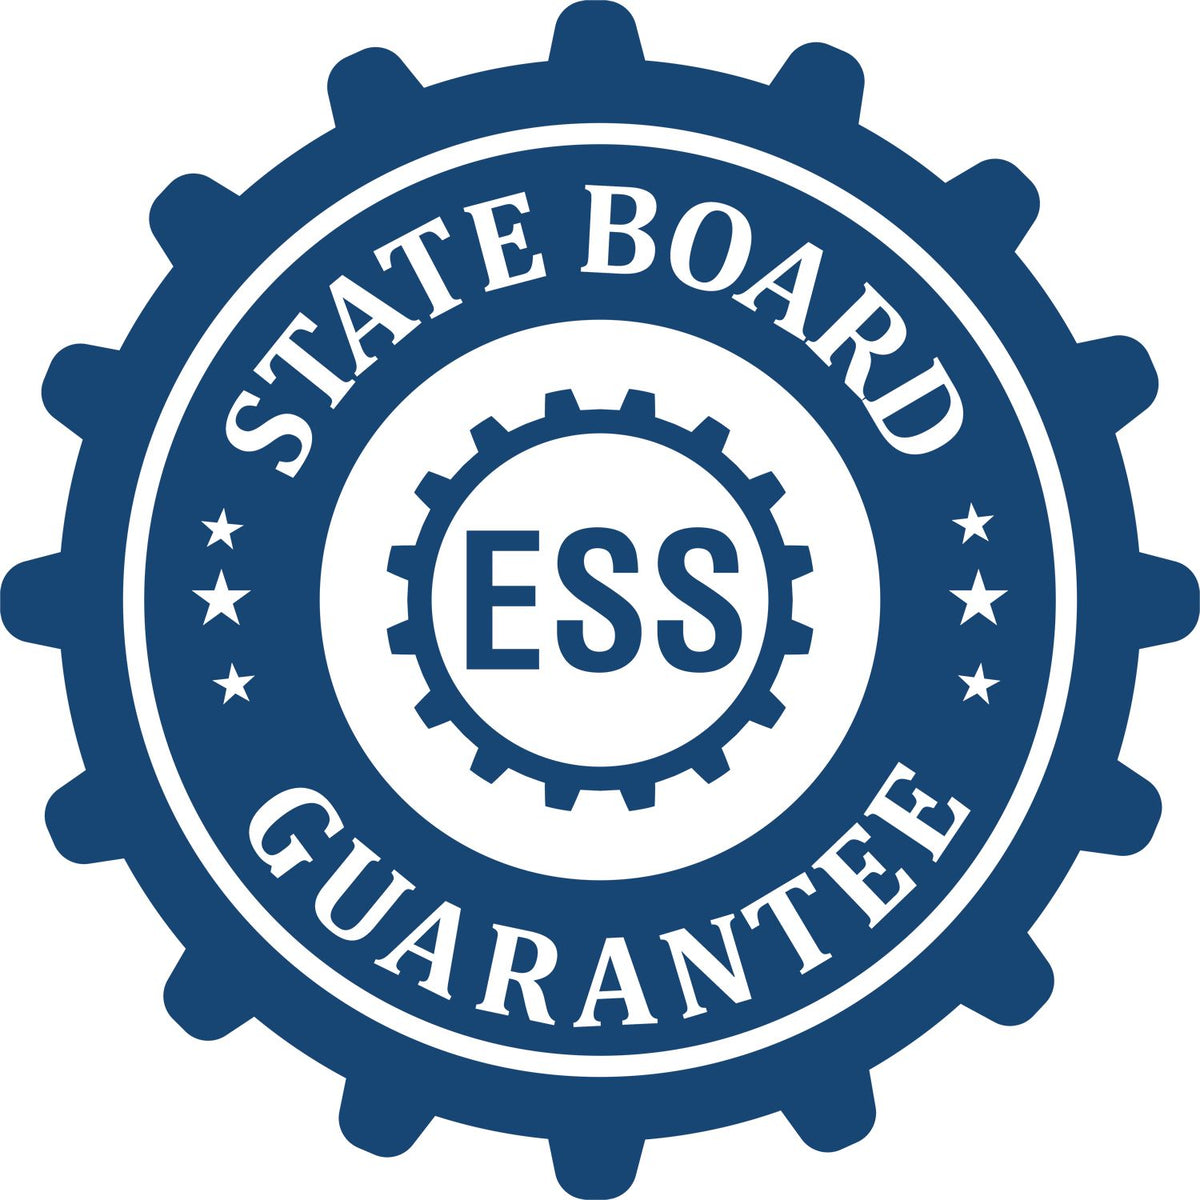 An emblem in a gear shape illustrating a state board guarantee for the State of Vermont Long Reach Architectural Embossing Seal product.